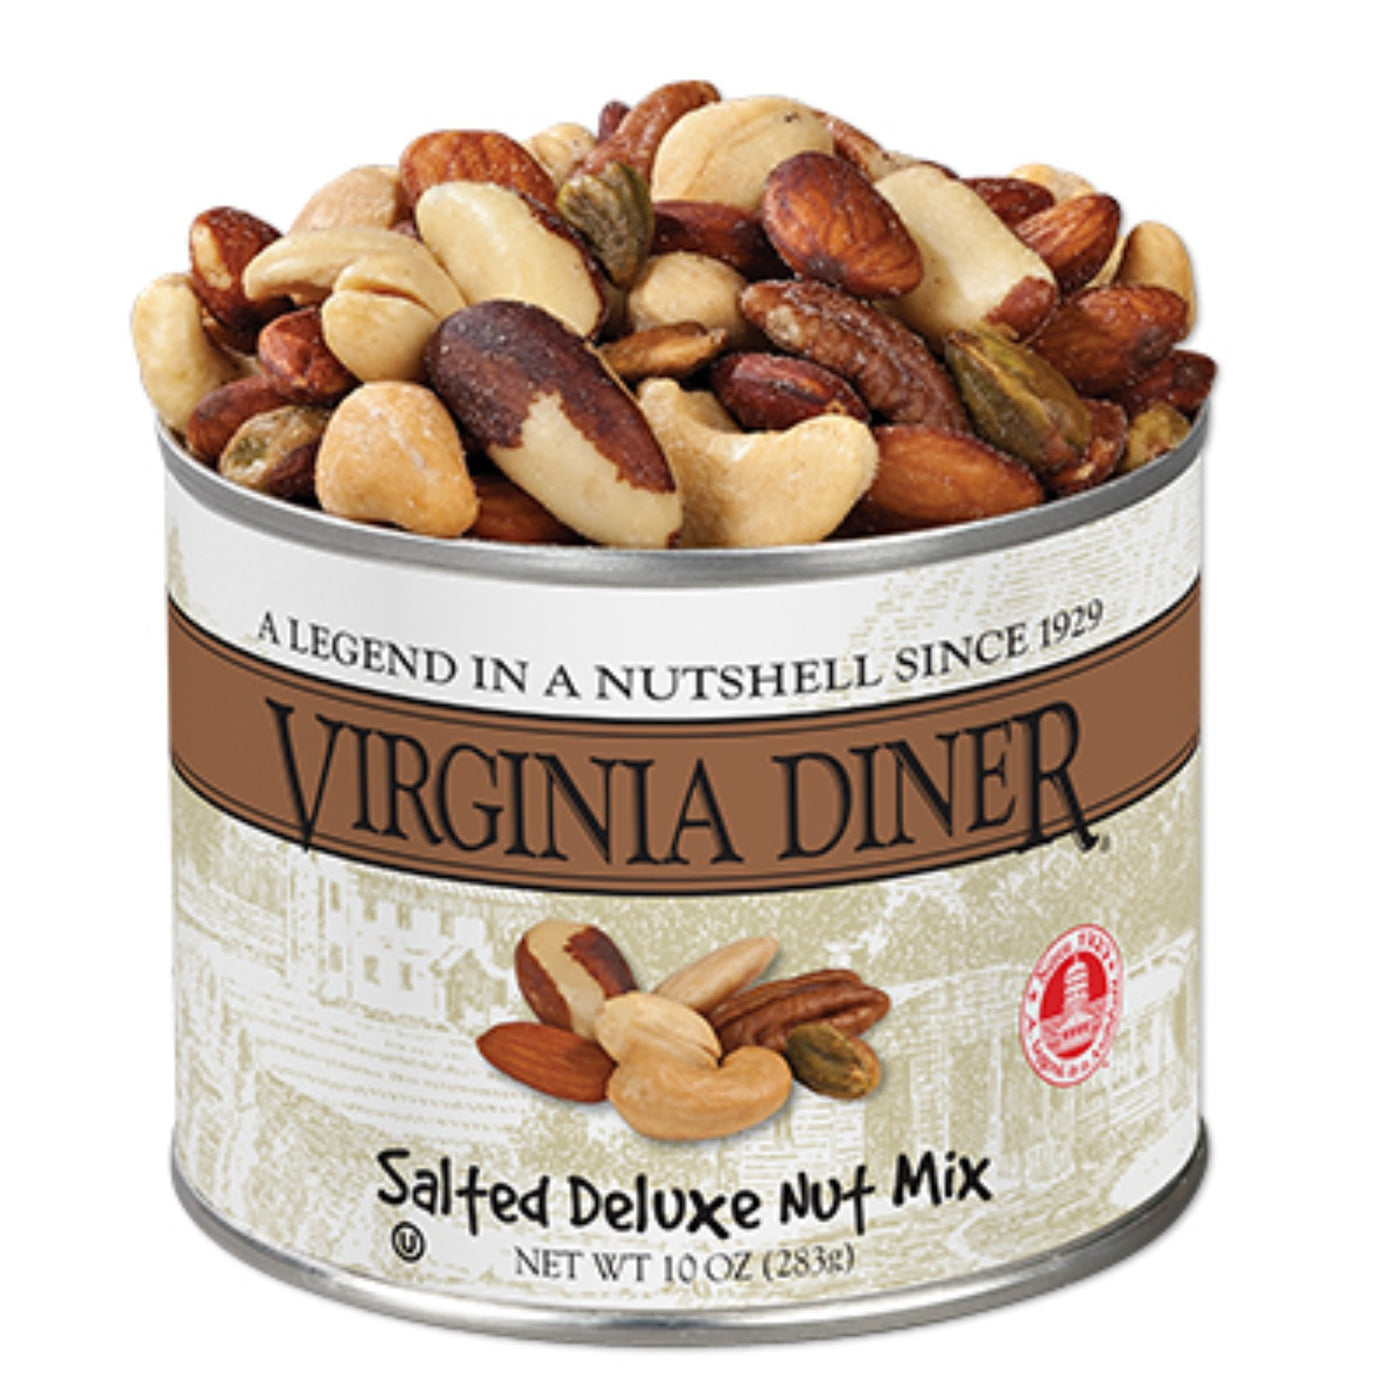 NUTS - Virginia Diner - 10 oz. Classic Deluxe Mixed Nuts